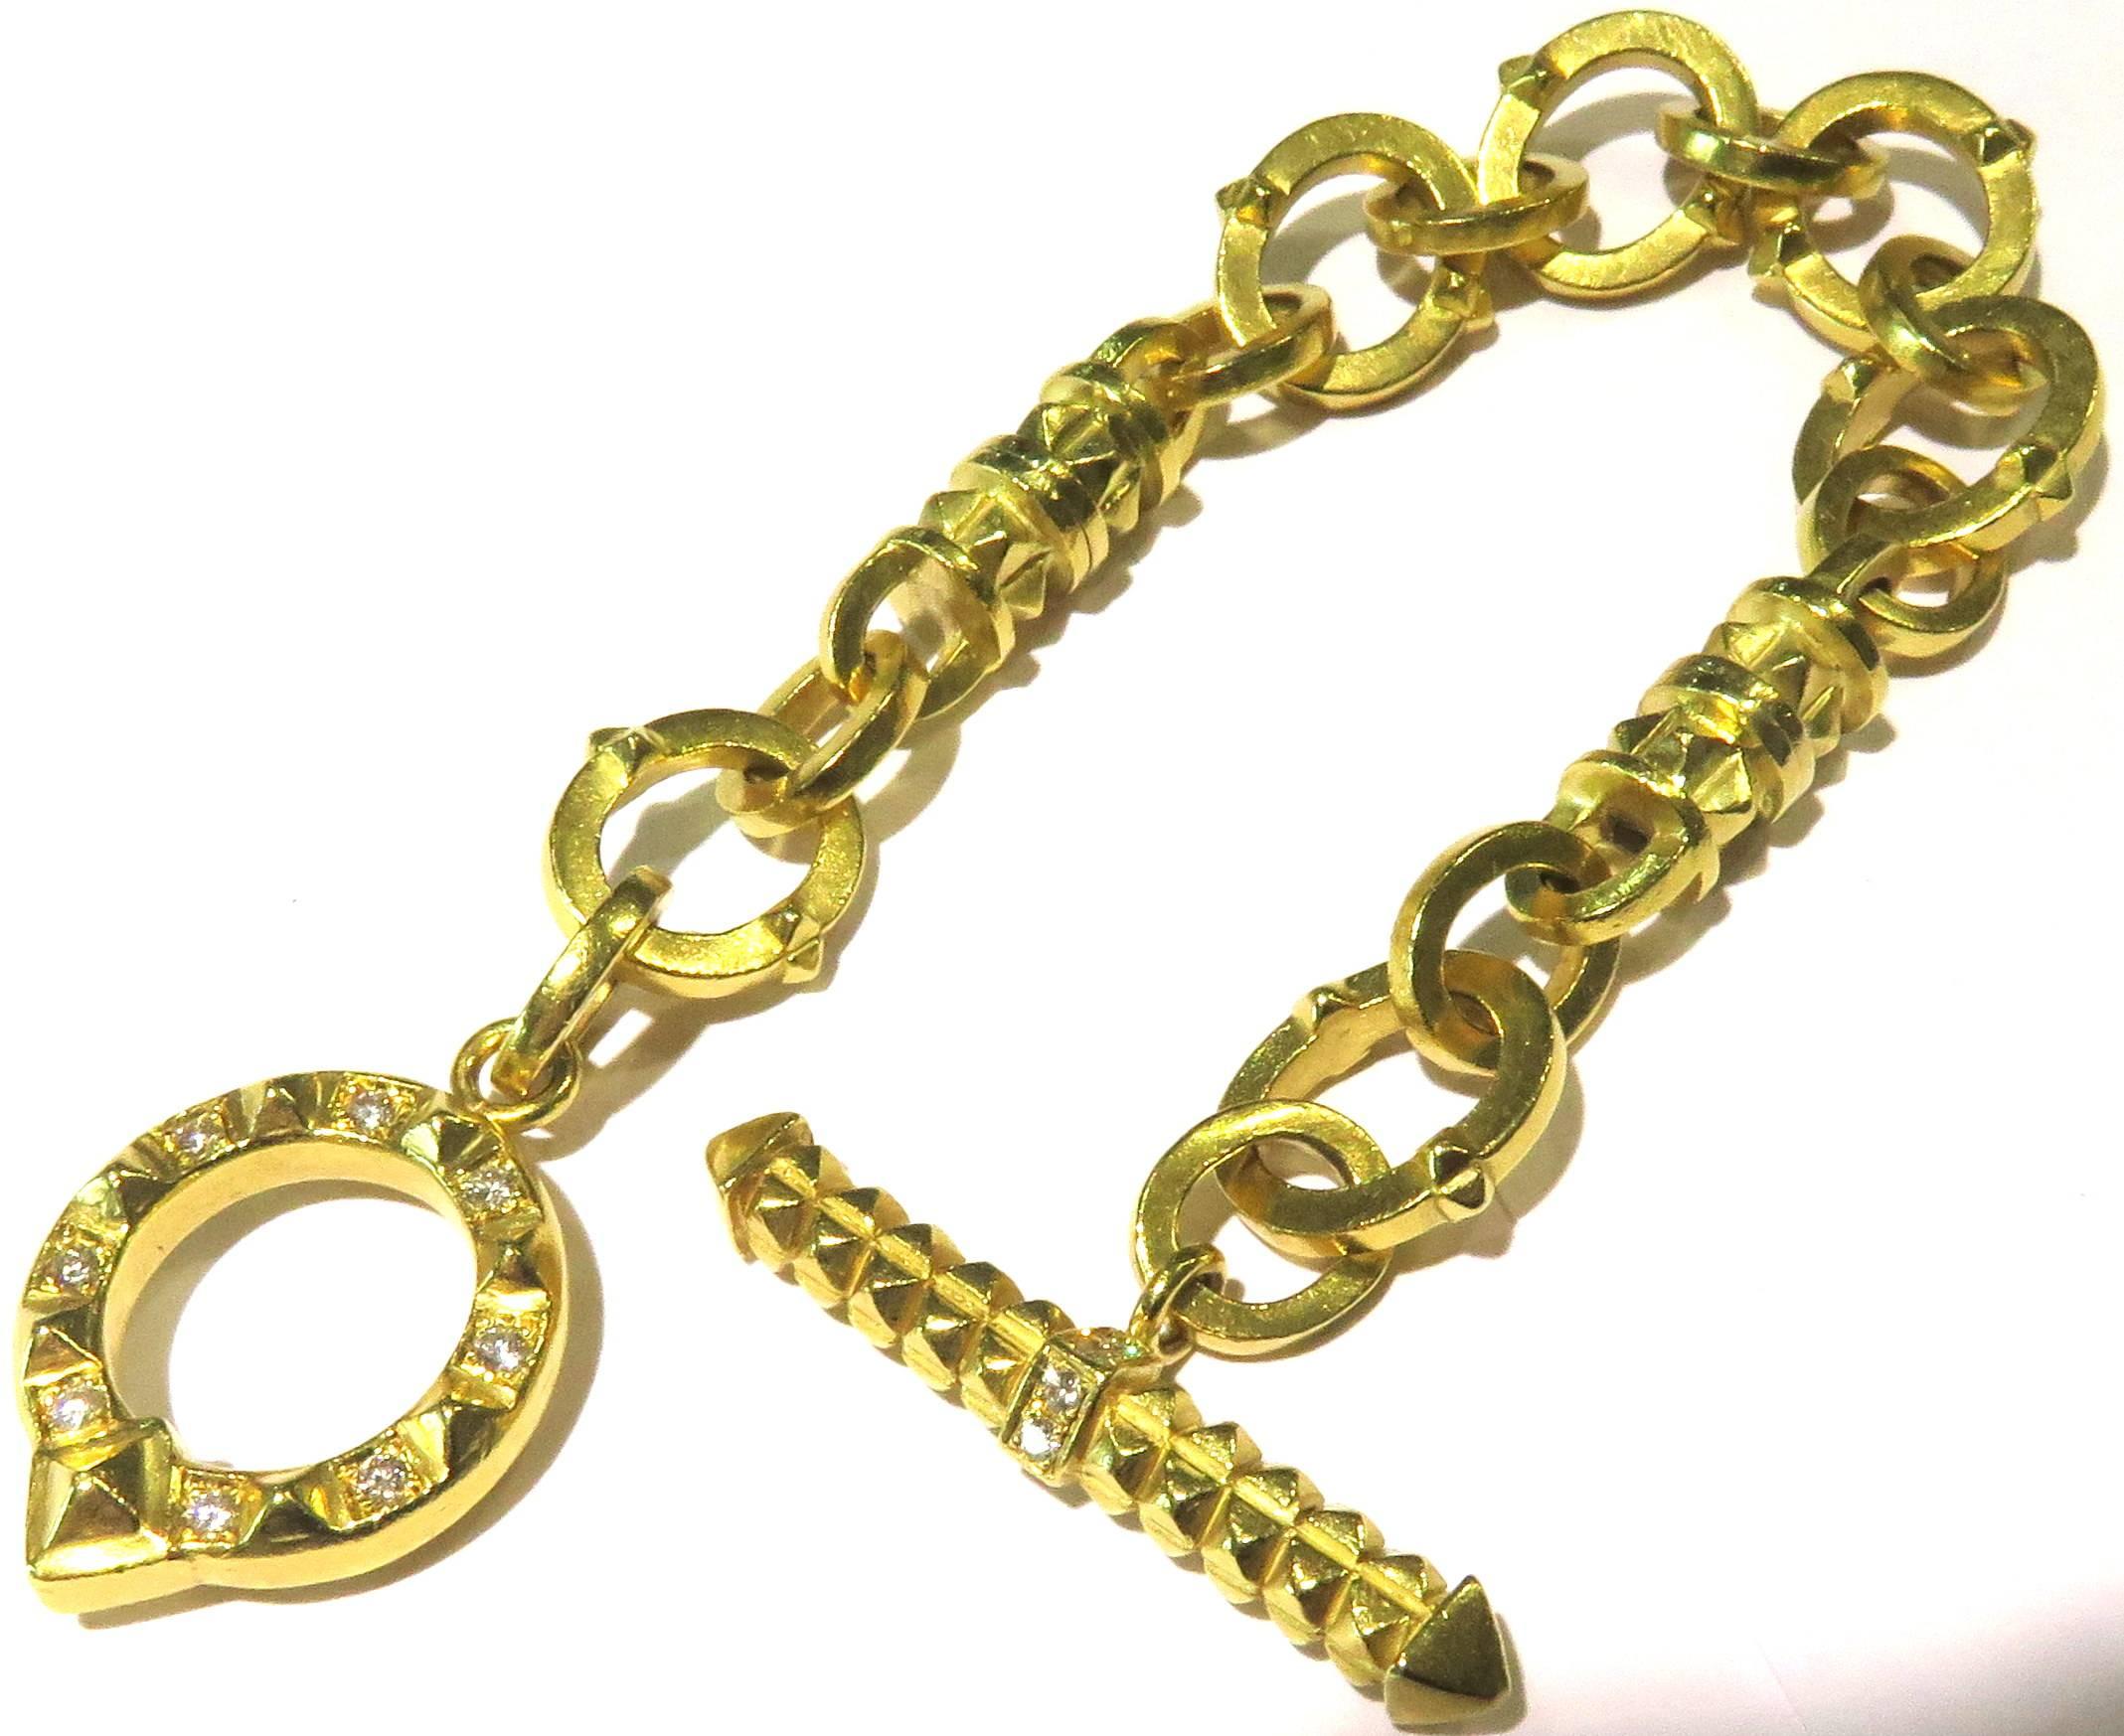 Exceptional Heavy Diamond Gold Solid Links Toggle Bracelet 4